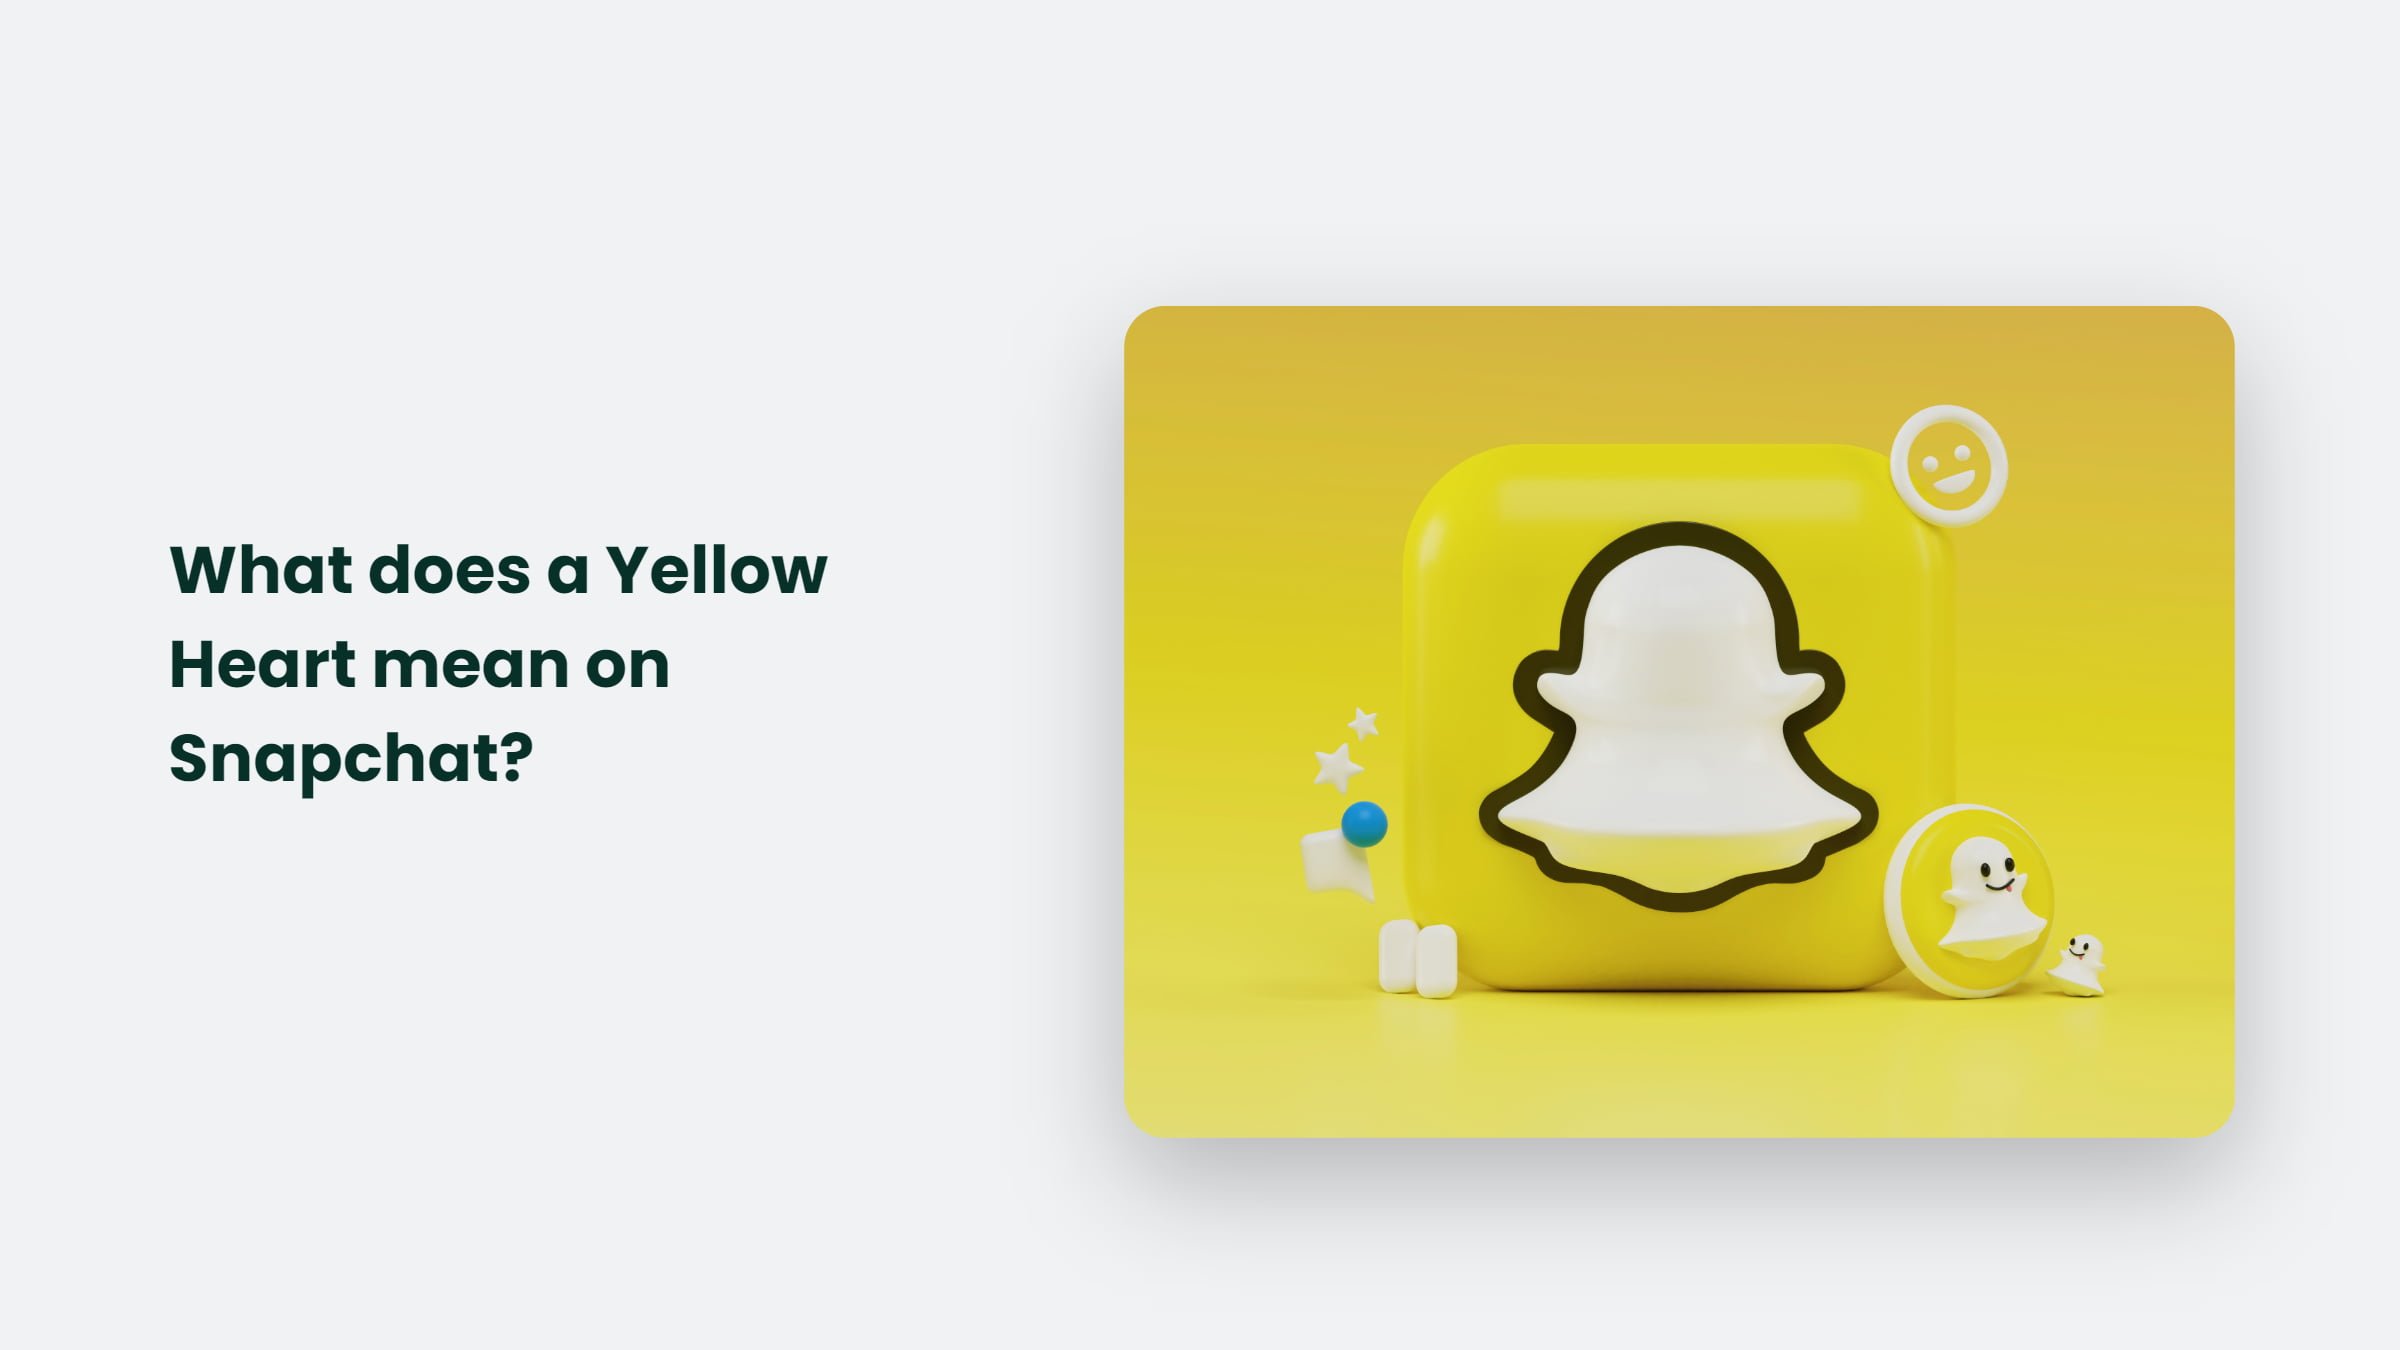 What Does A Yellow Heart Mean On Snapchat?